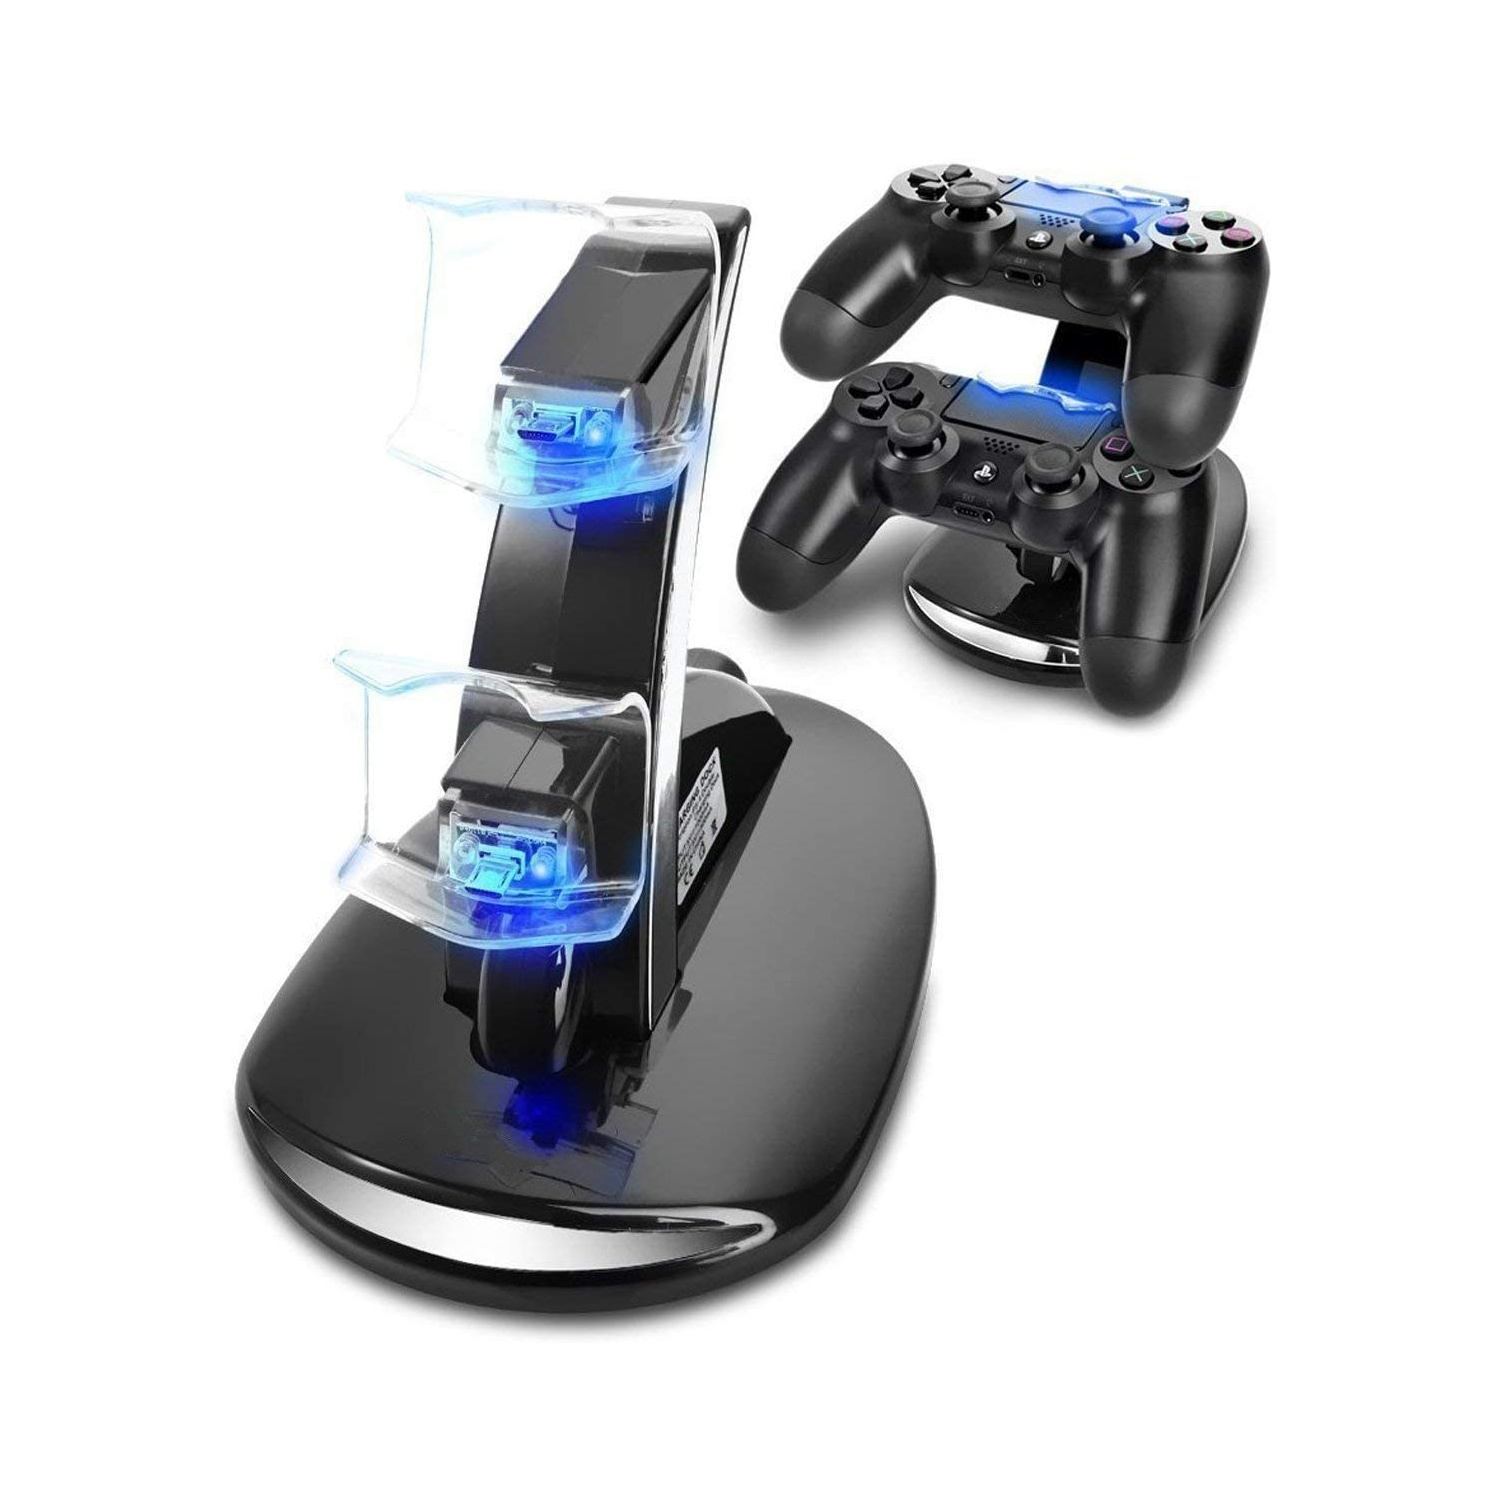 PS4 Controller Charger, PS4 Slim / PS4 Pro / Playstation 4 / PS4 Controller Charger Charging Docking Station